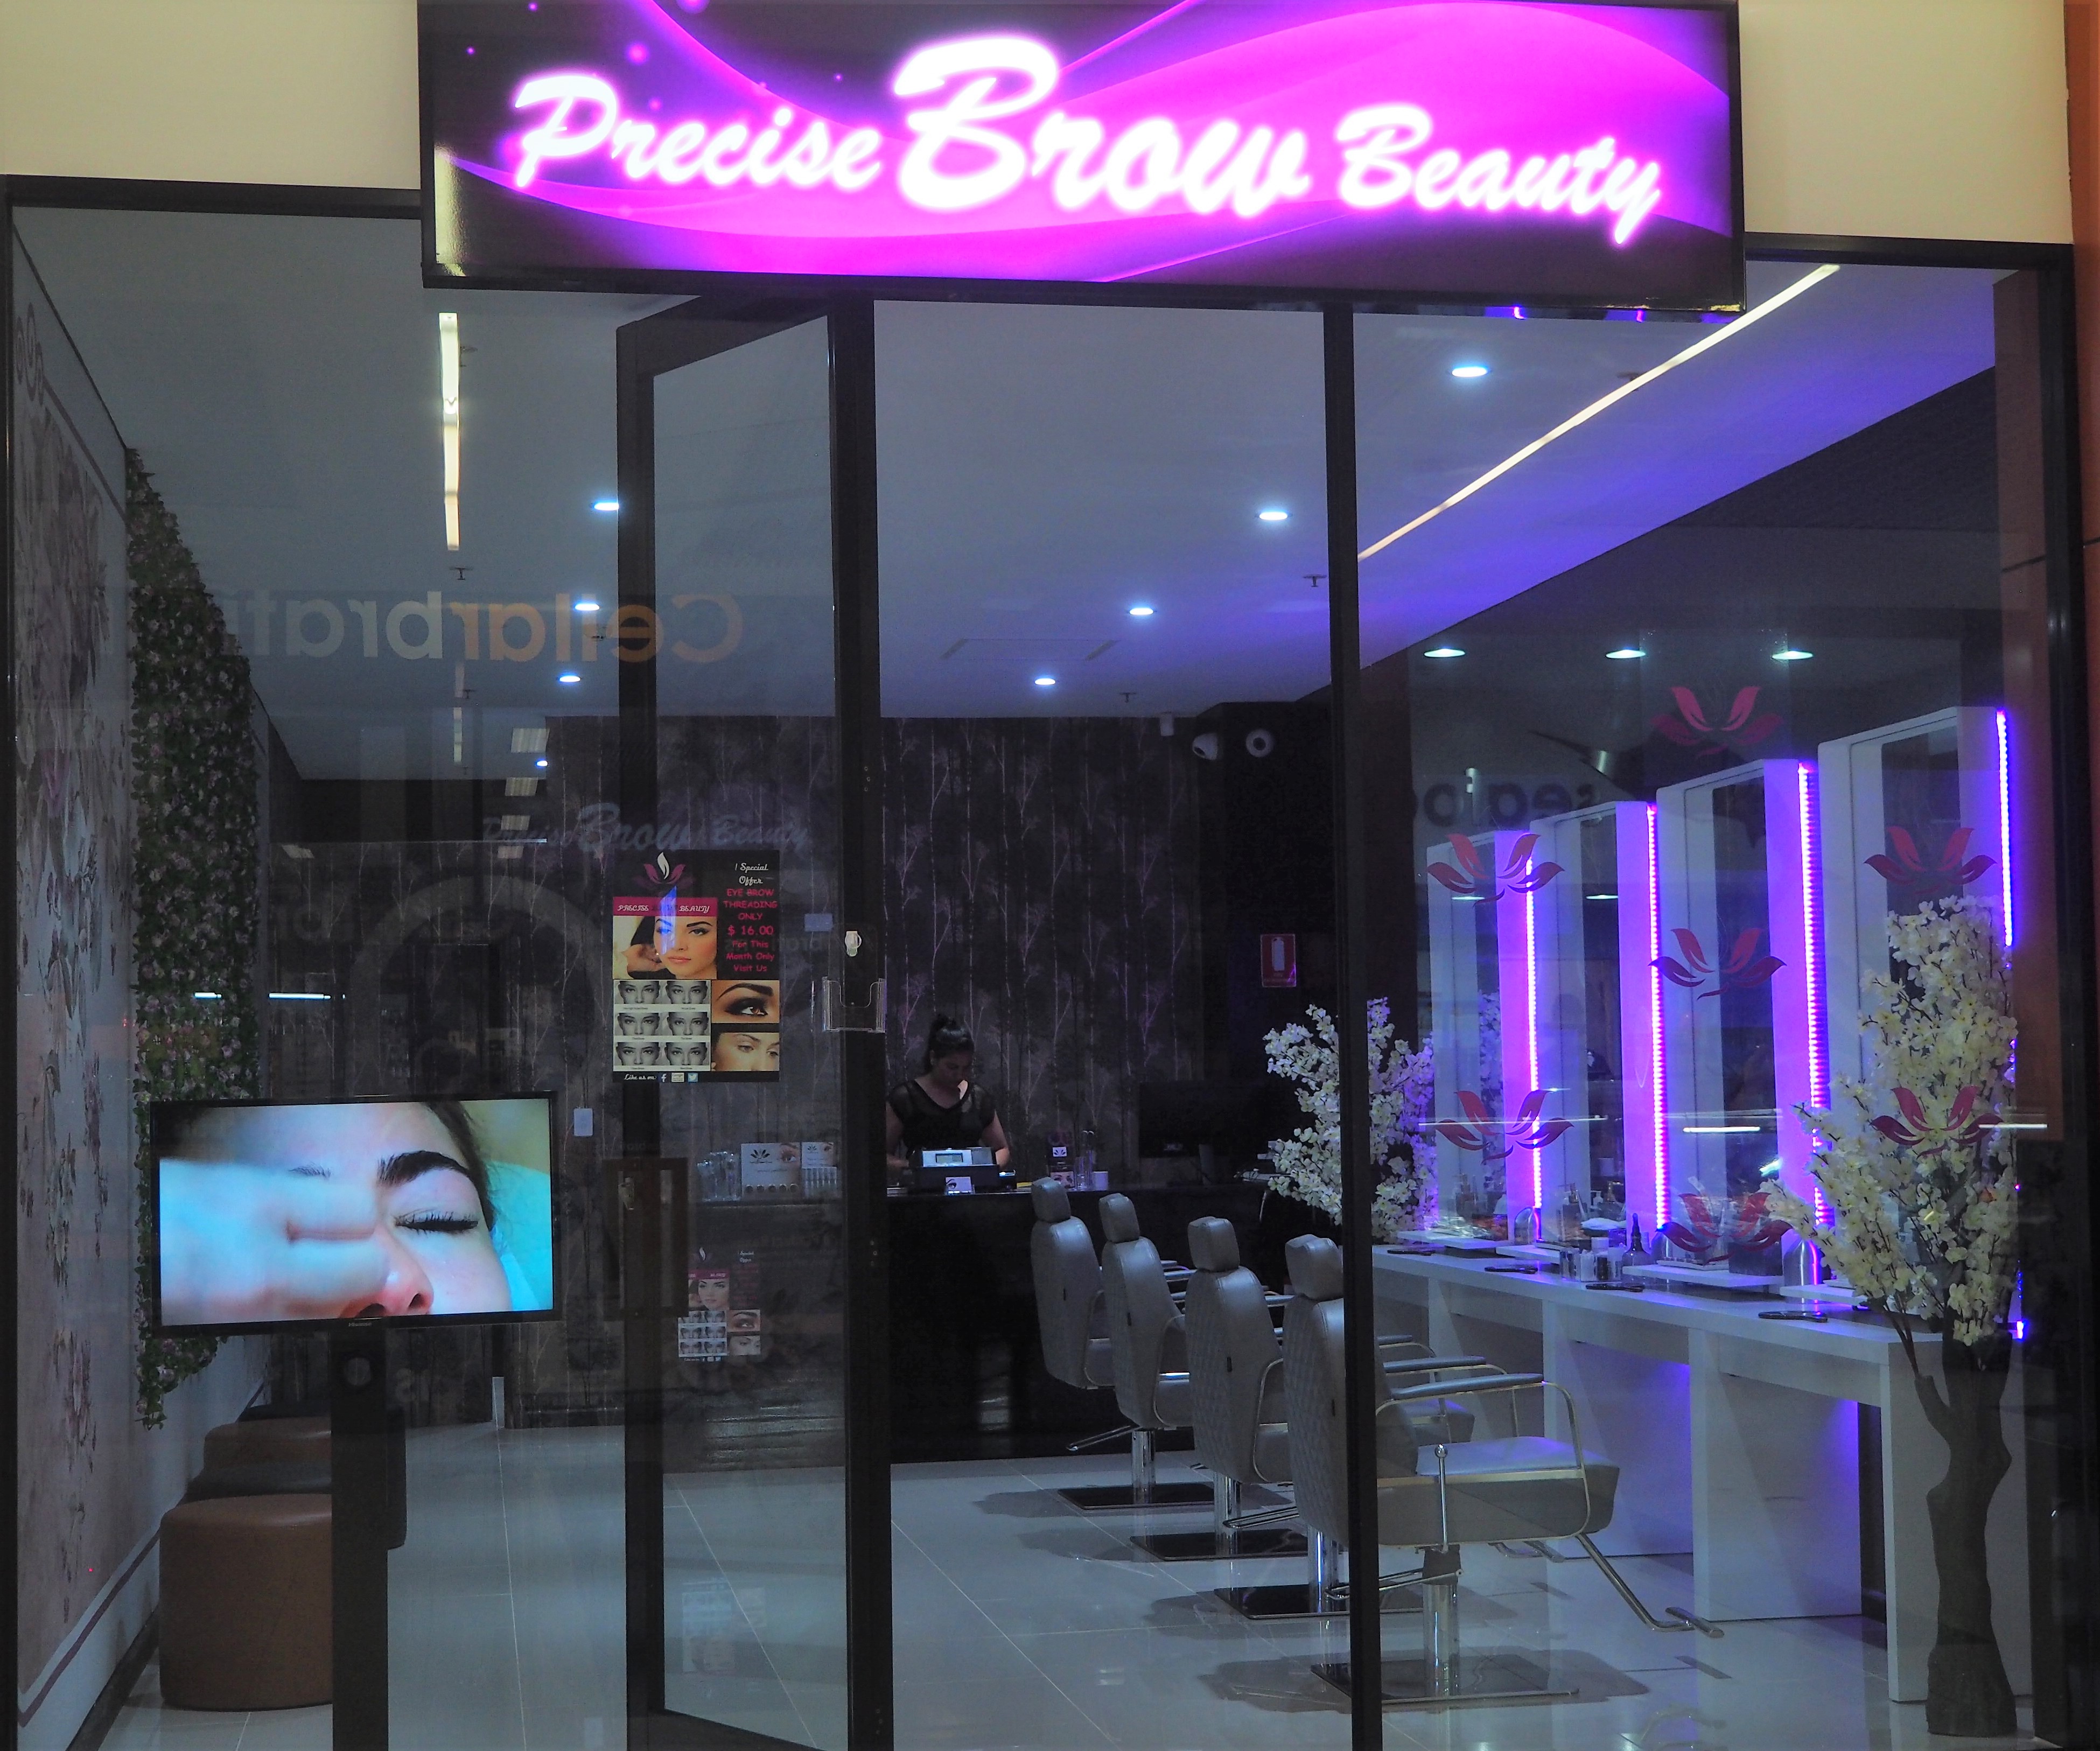 Front of Precise Brow Beauty shop